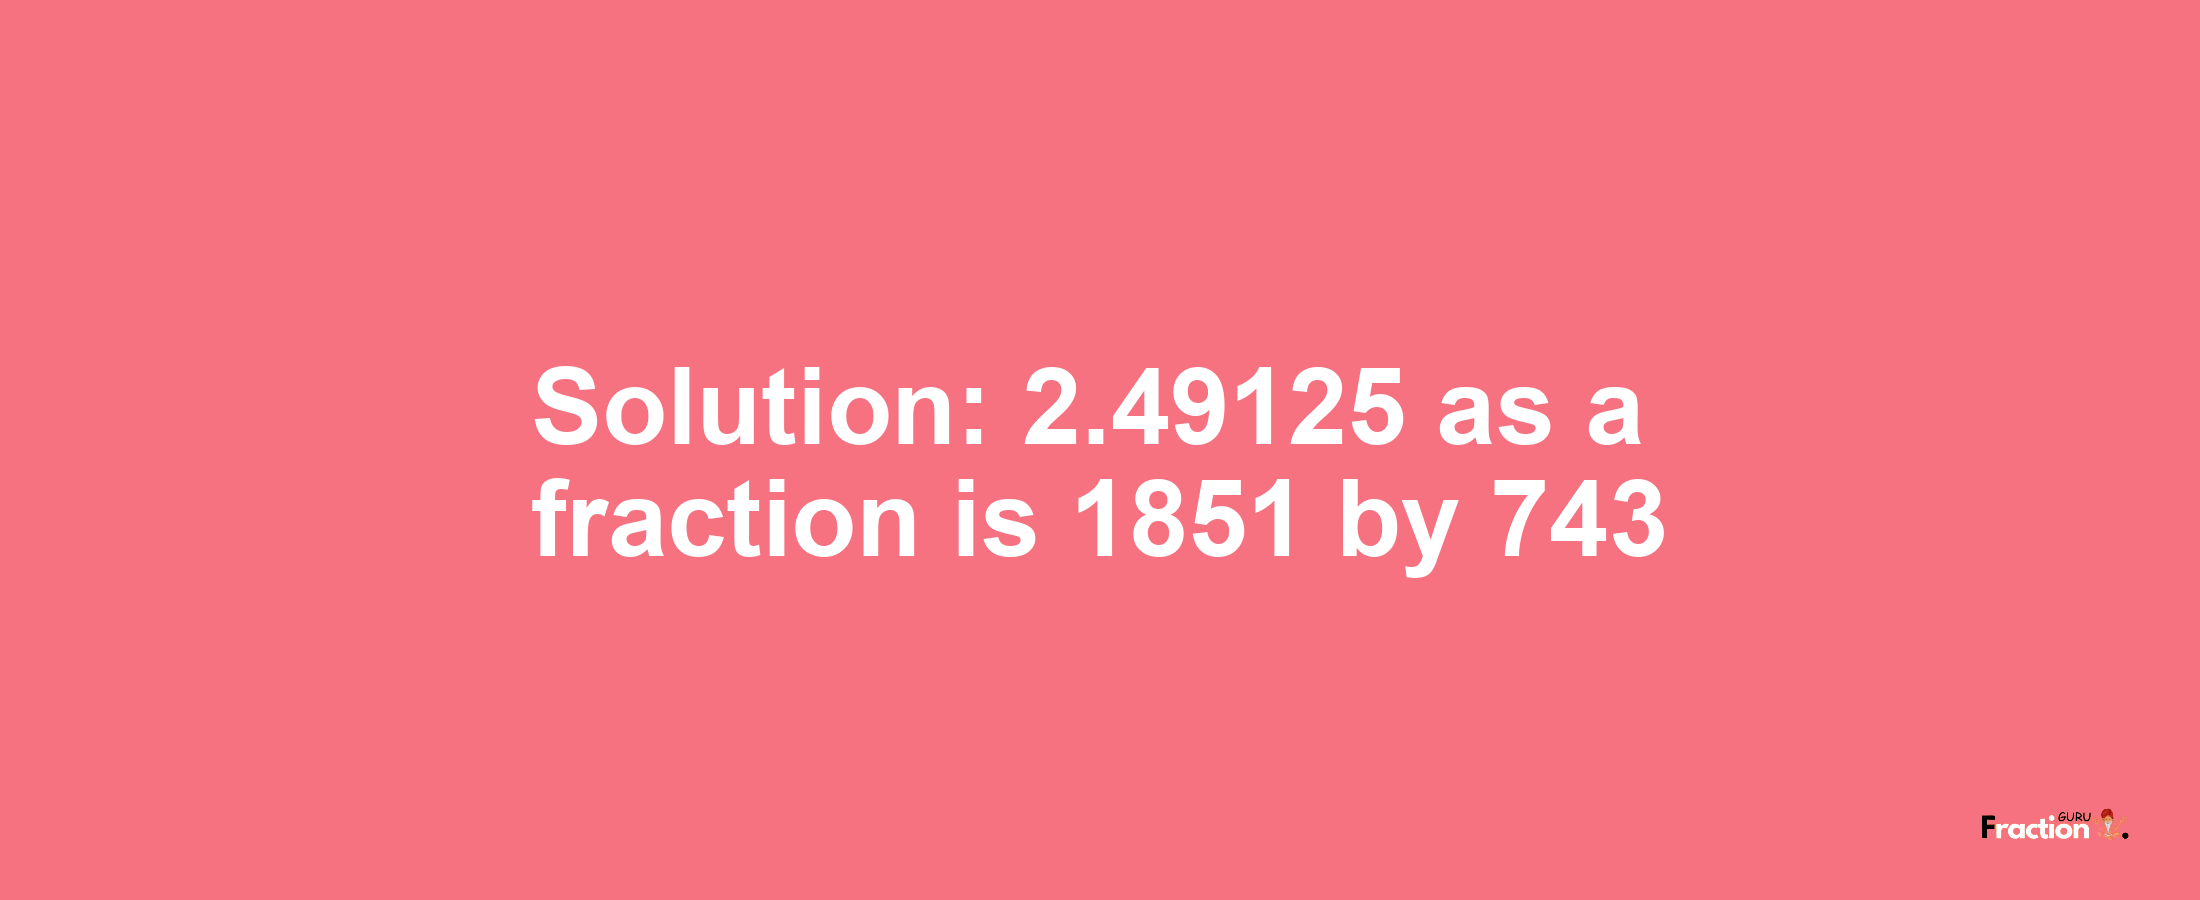 Solution:2.49125 as a fraction is 1851/743